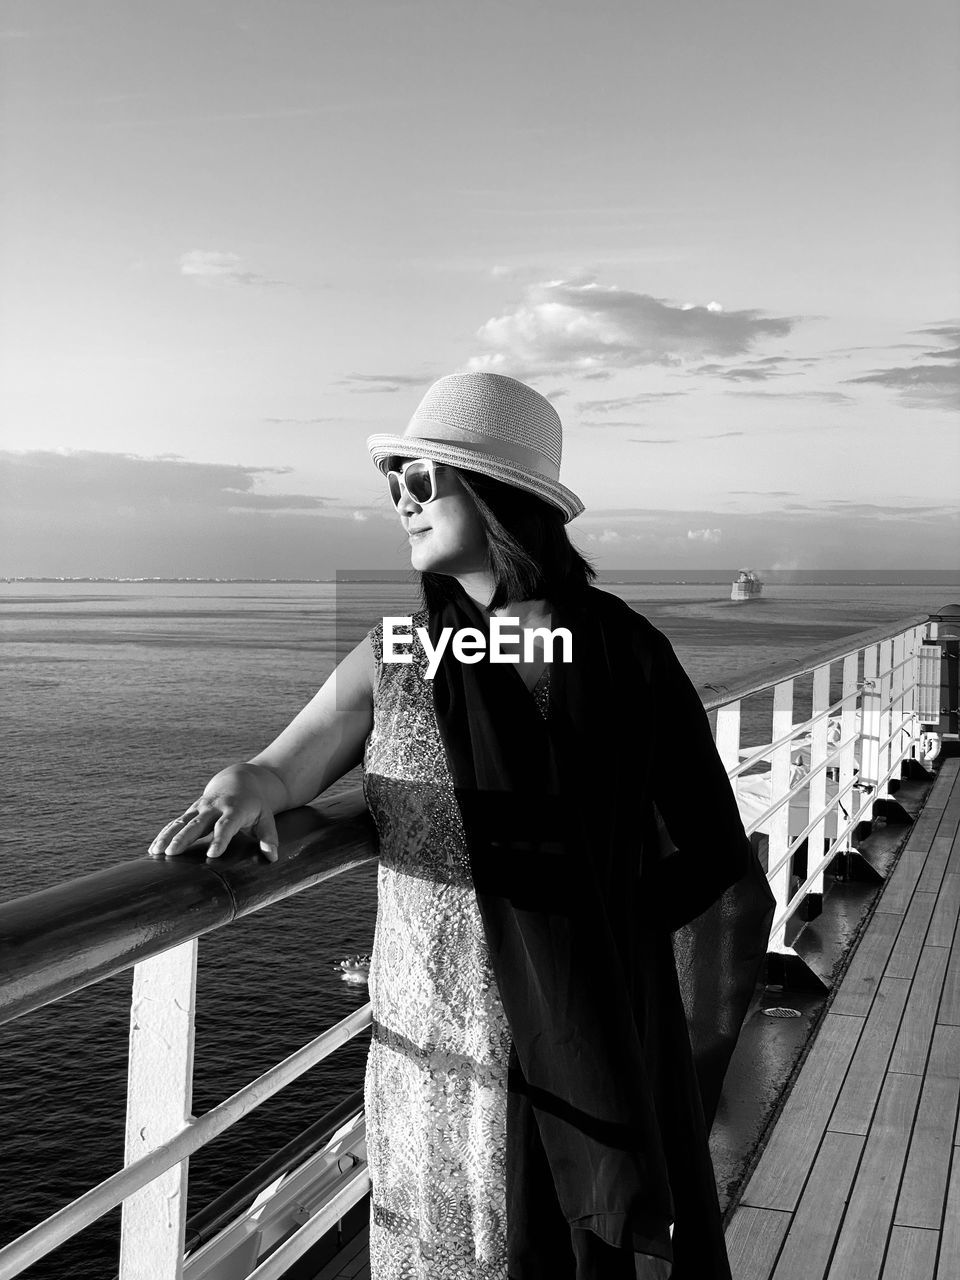 Woman wearing sunglasses while standing by railing of boat in sea against sky